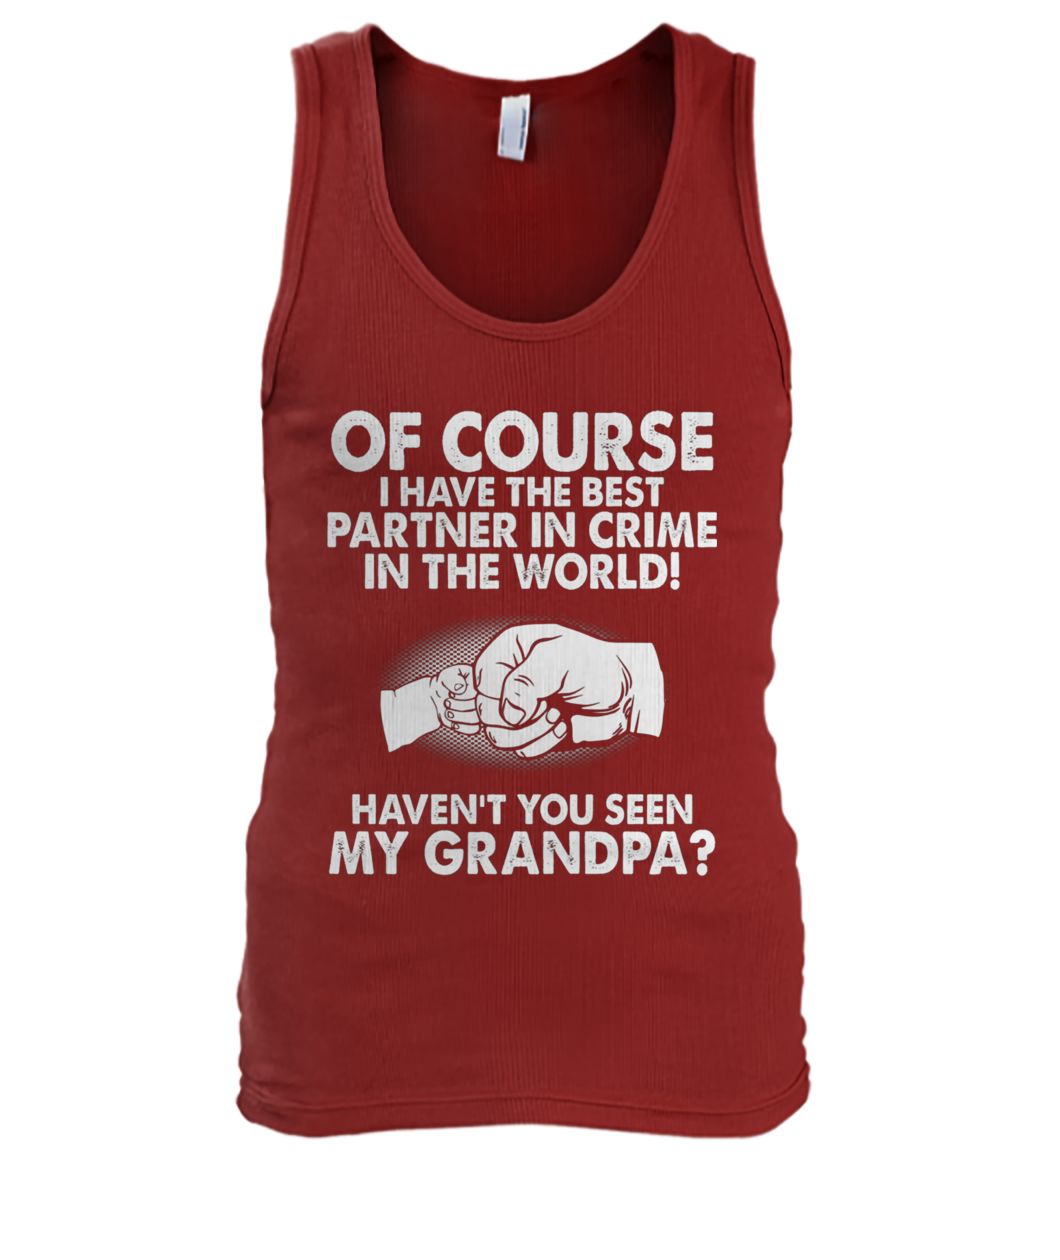 Of course I have the best partner in crime in the world haven't you seen my grandpa men's tank top